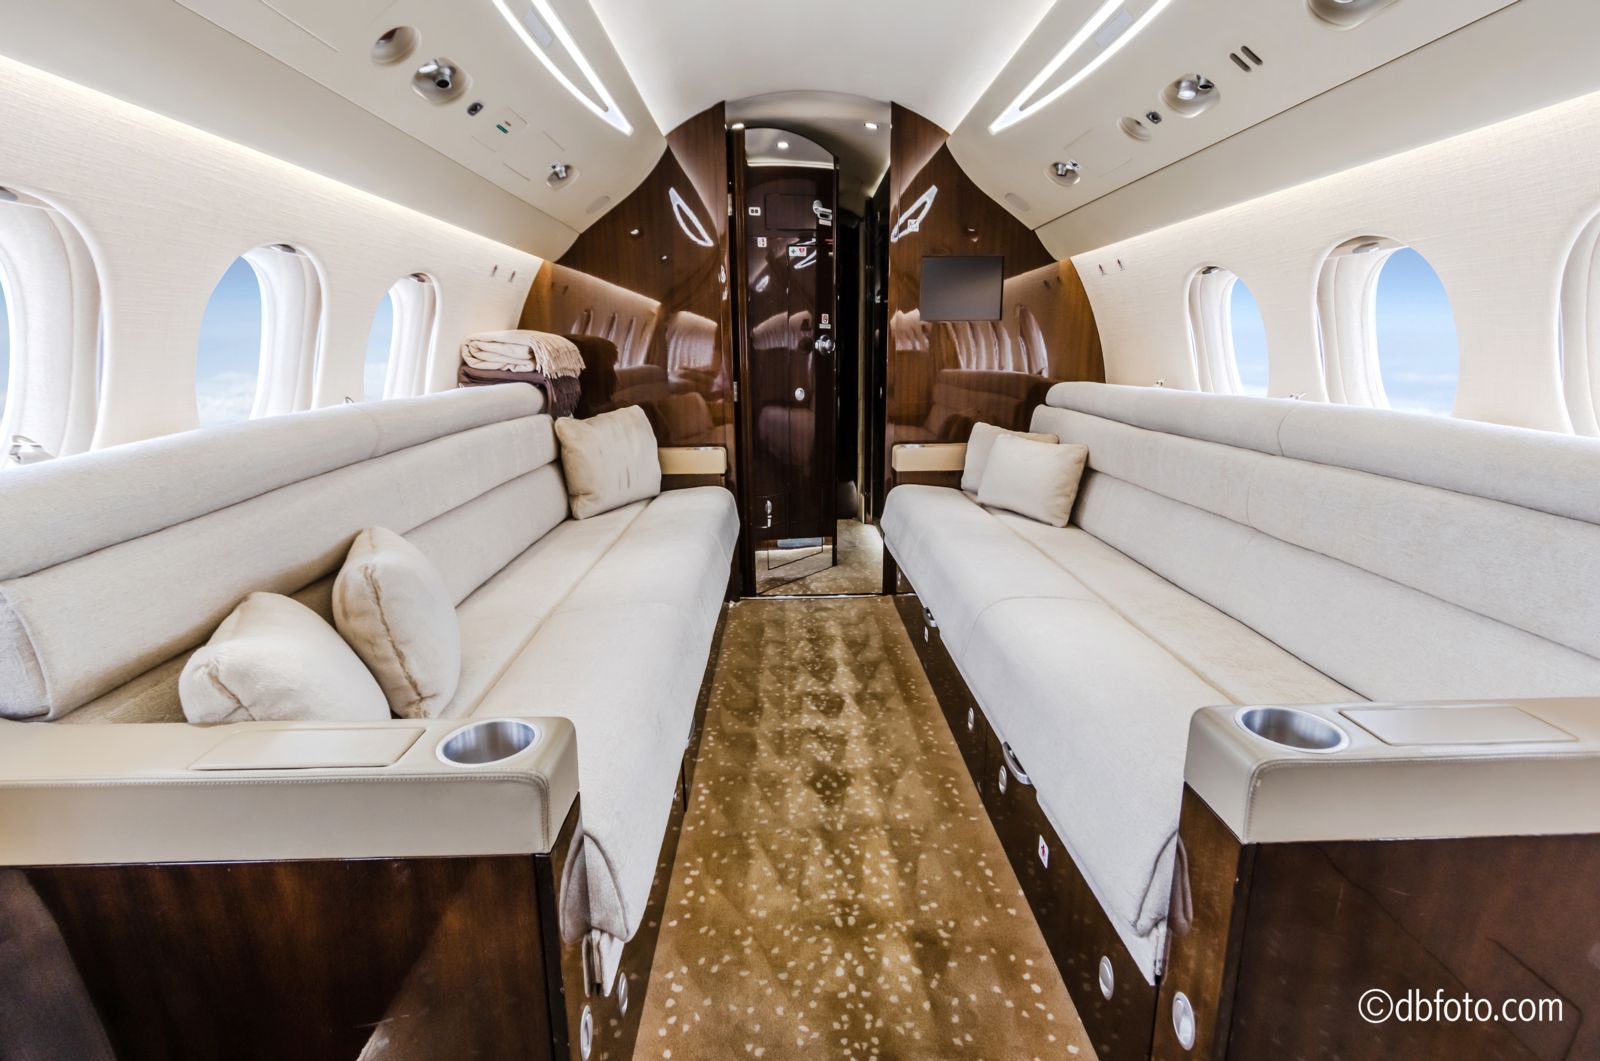 Dassault Falcon 7X  S/N 26 for sale | gallery image: /userfiles/images/F7X_sn26/cabin%20%C2%A9dbfoto22.jpg